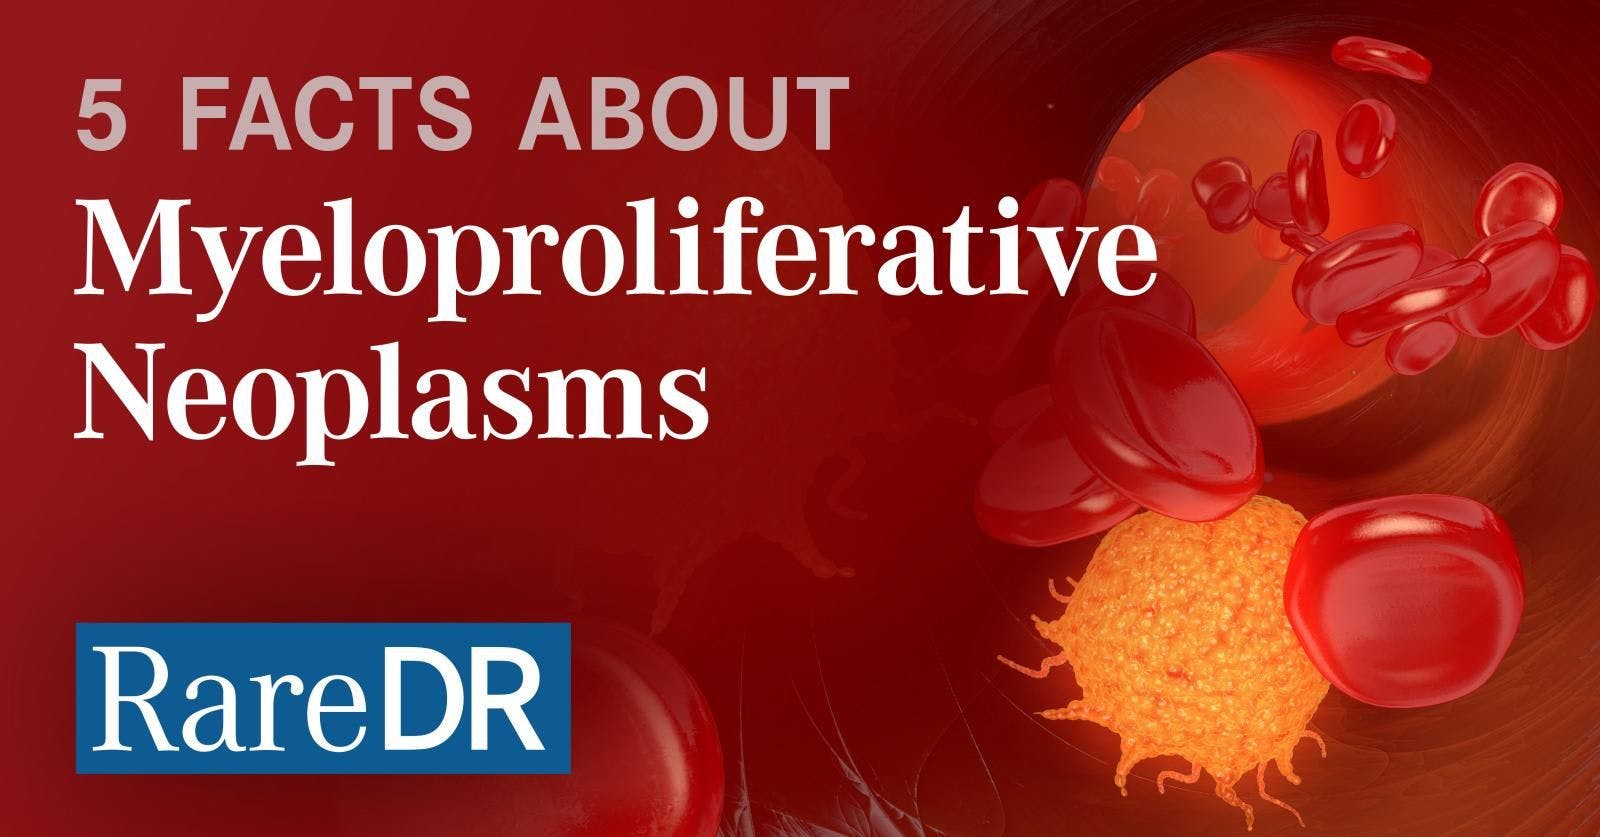 Five Facts About: Myeloproliferative Neoplams (MPNs) [Infographic]